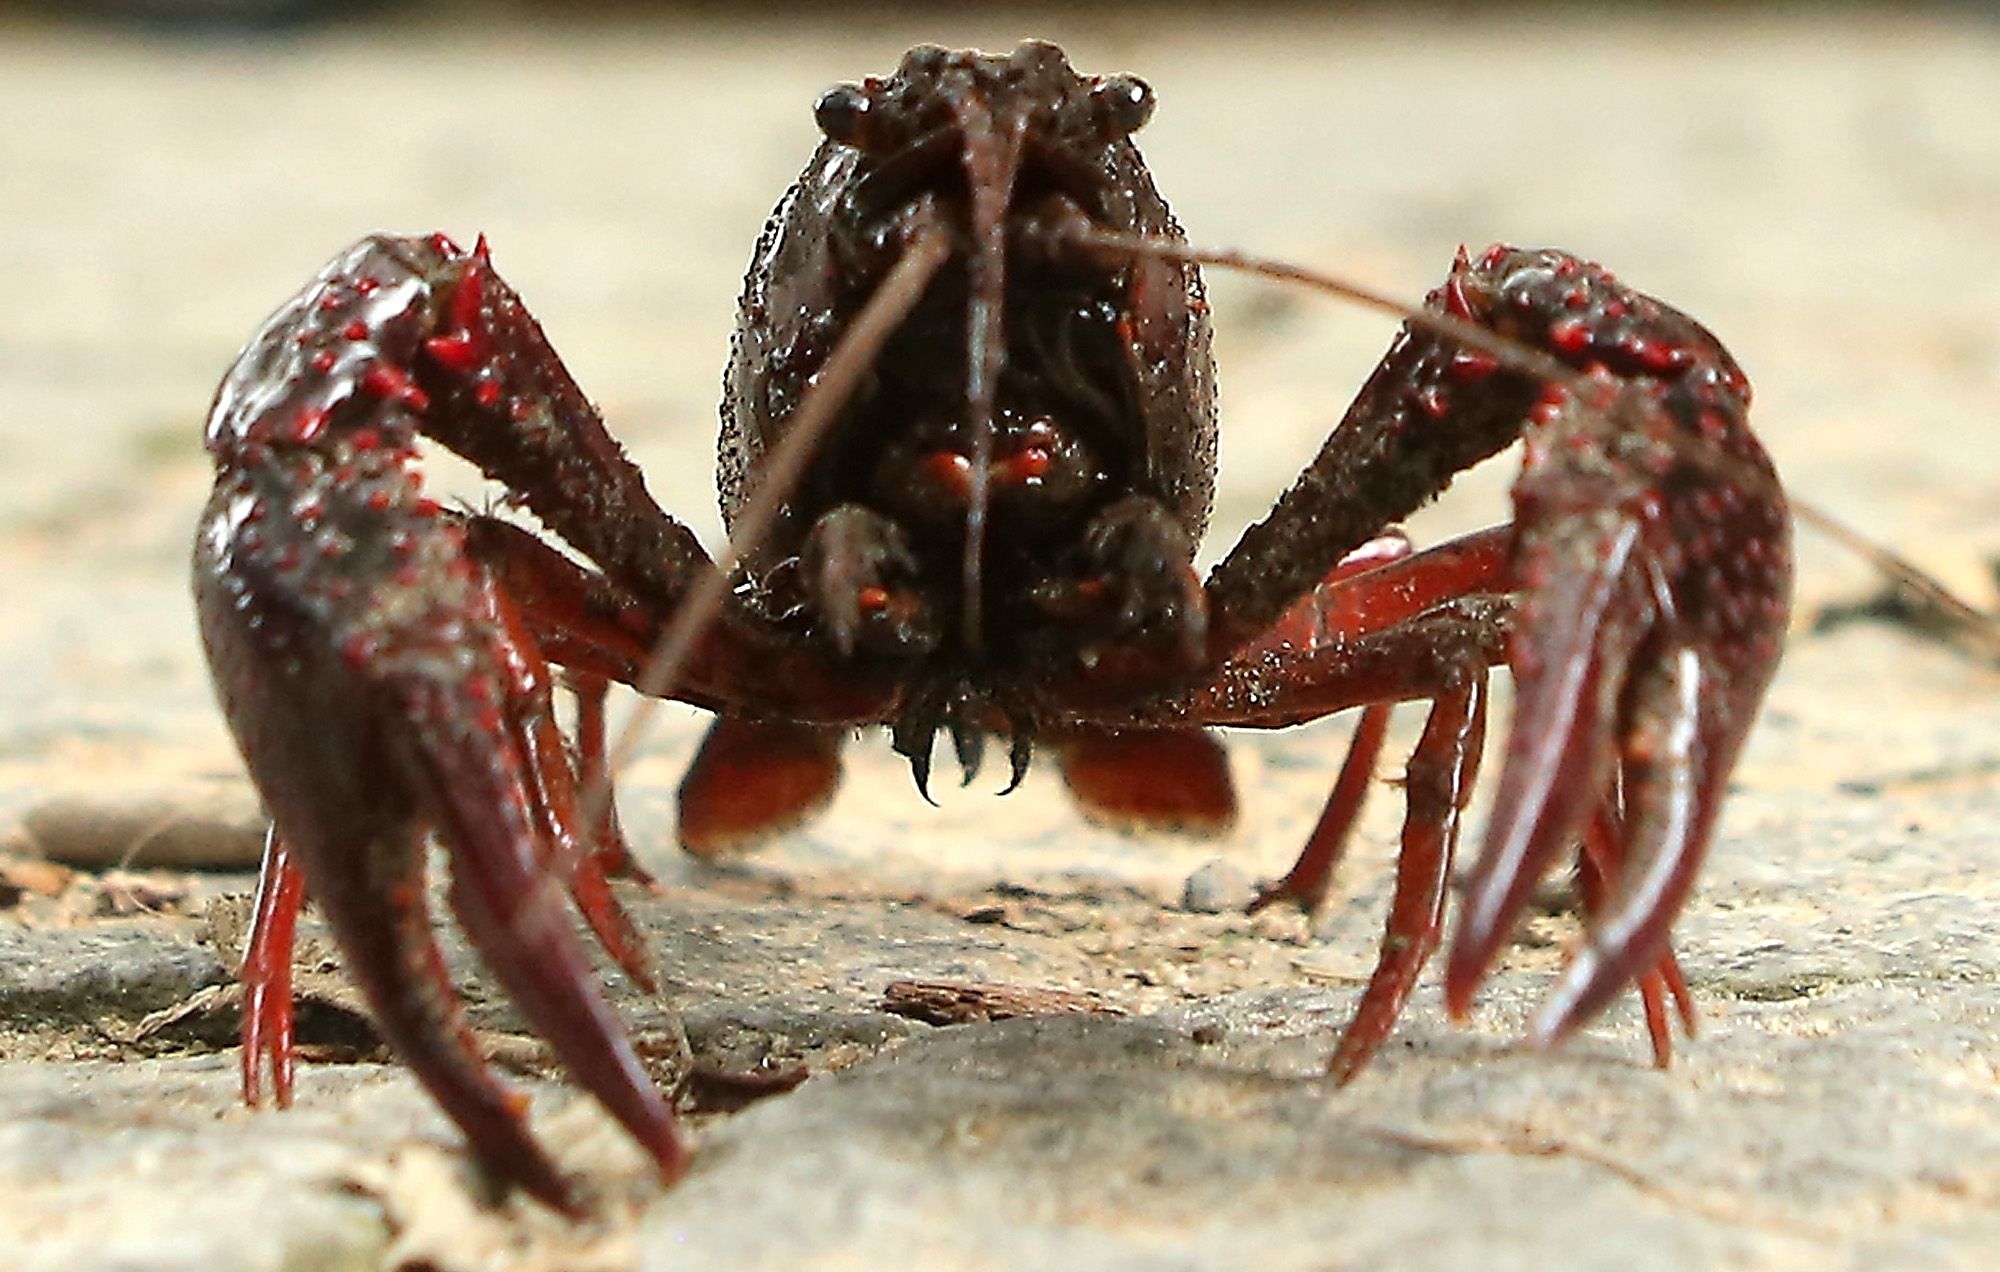 Video: Crayfish Pulls Off Its Own Claw to Escape Boiling Water